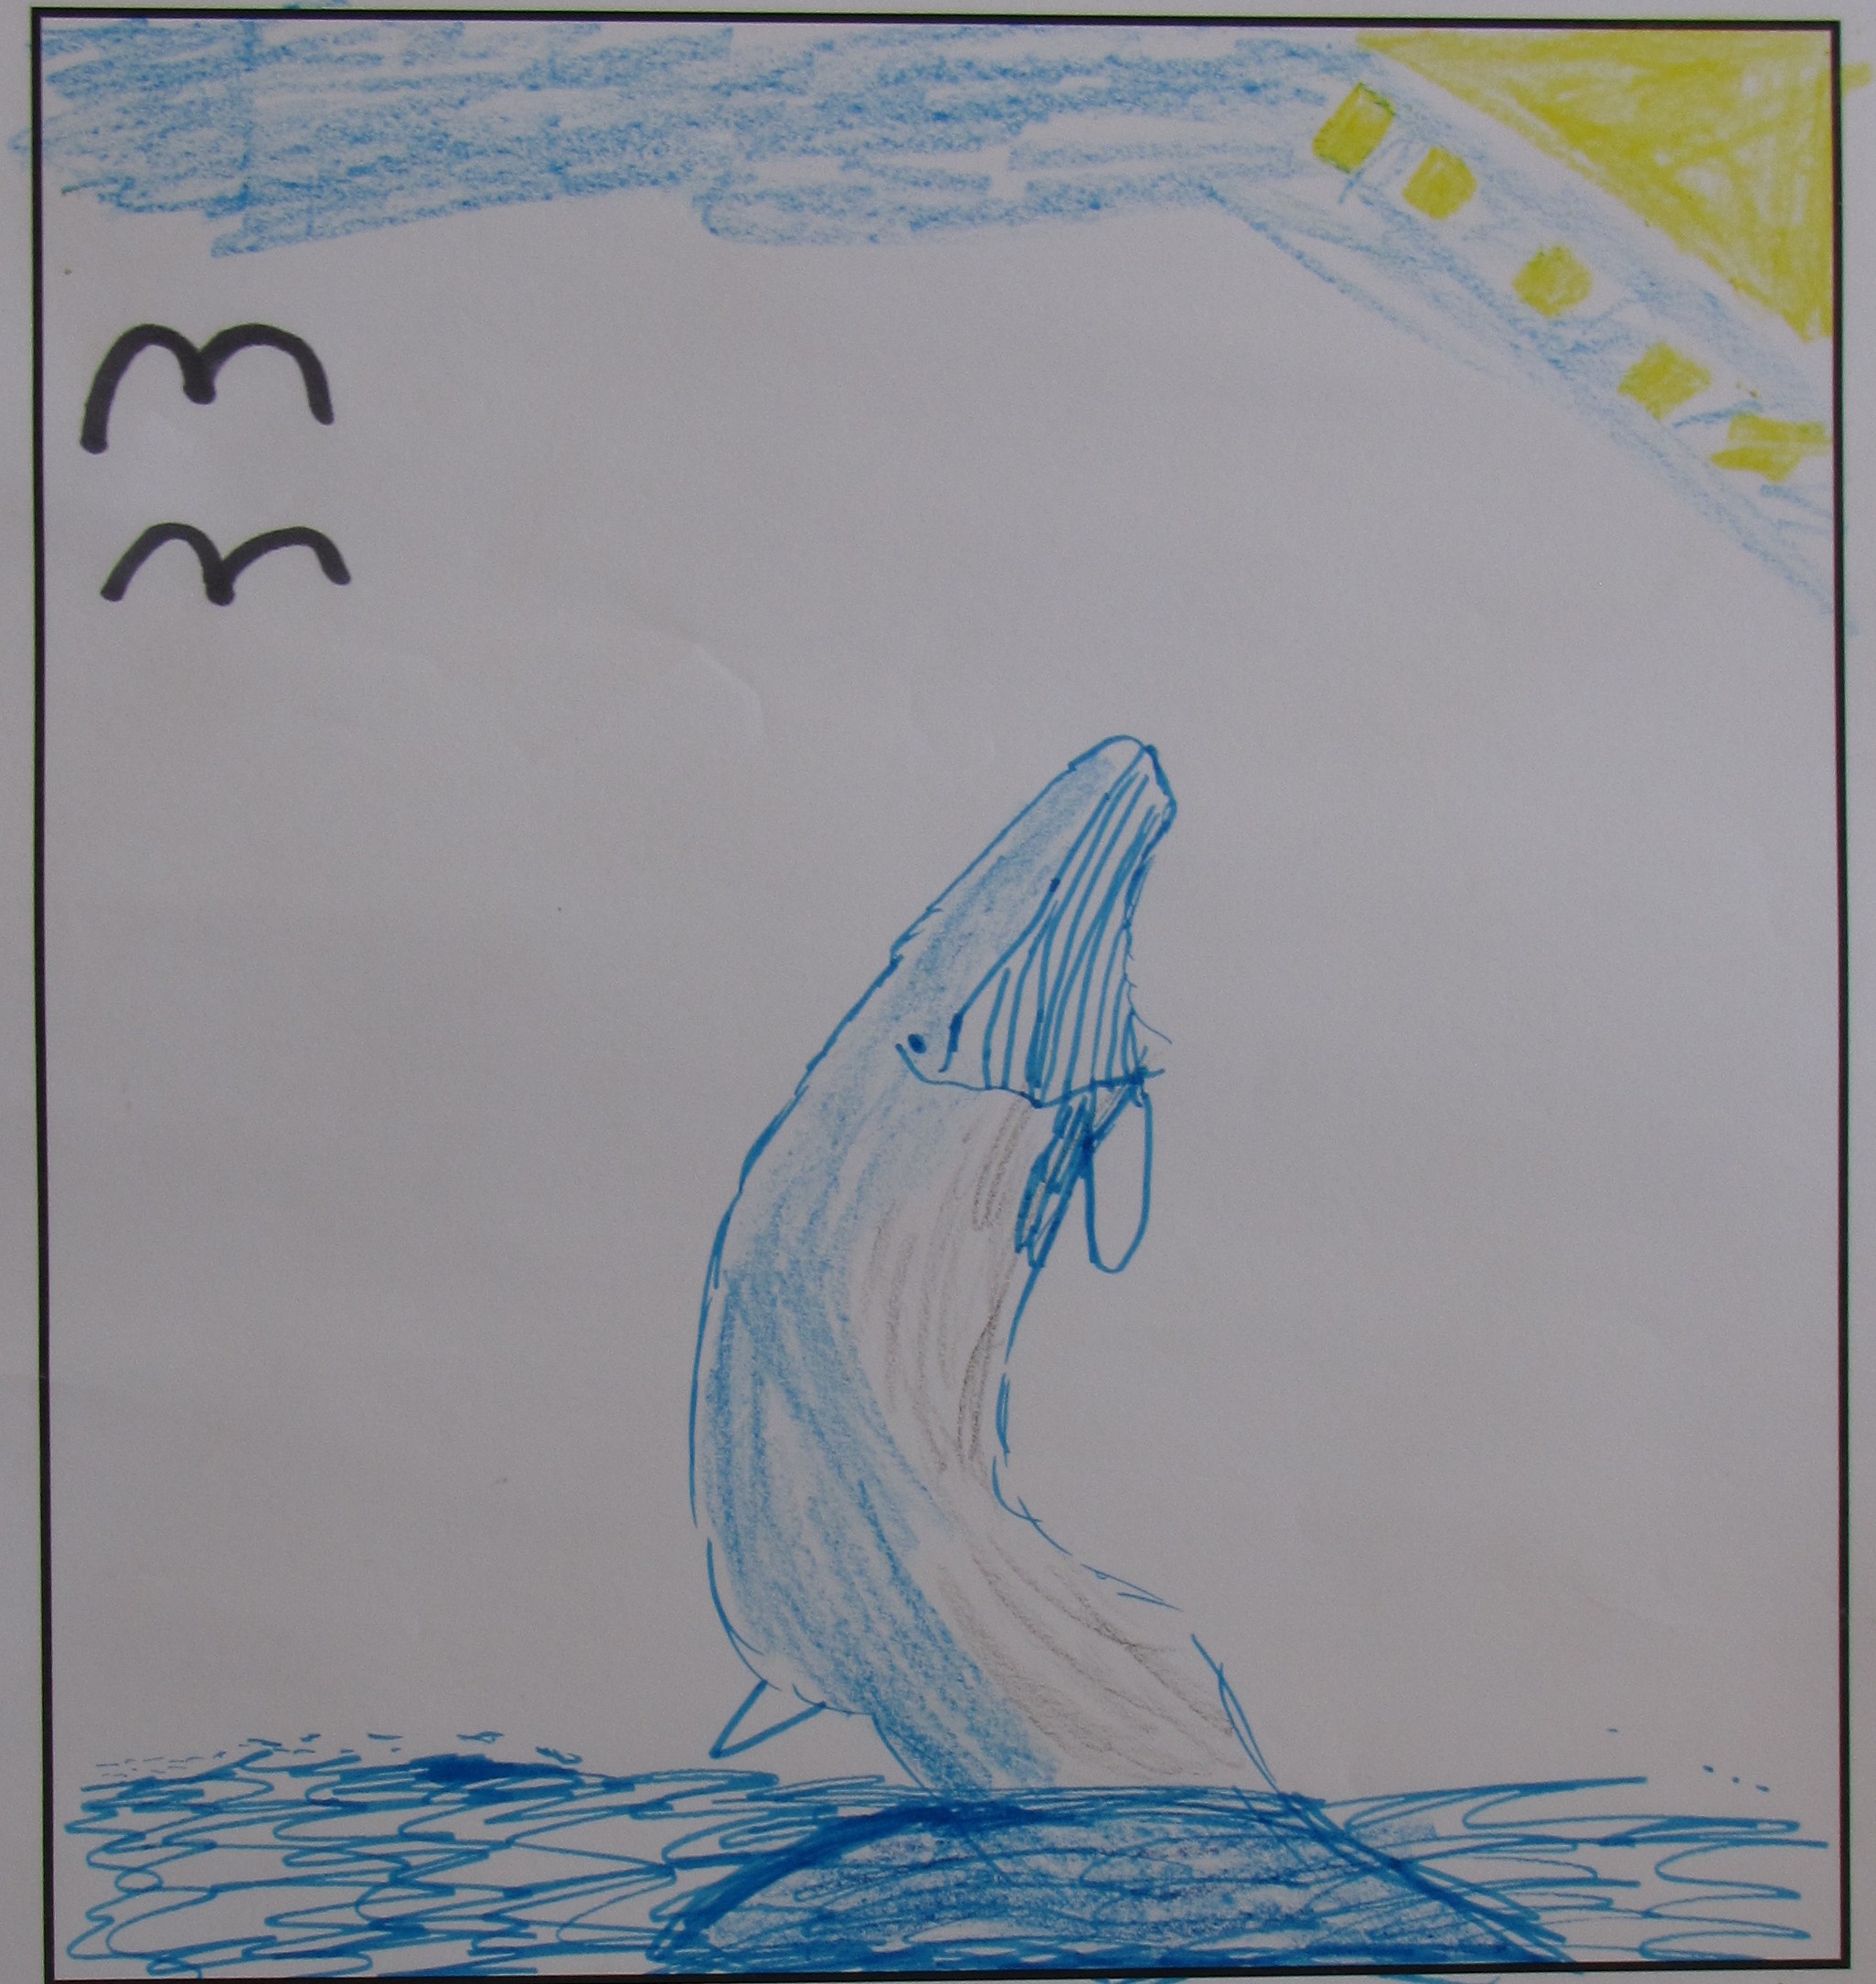 'The Whale Adventure' by Jessica McNeilly, Age 7